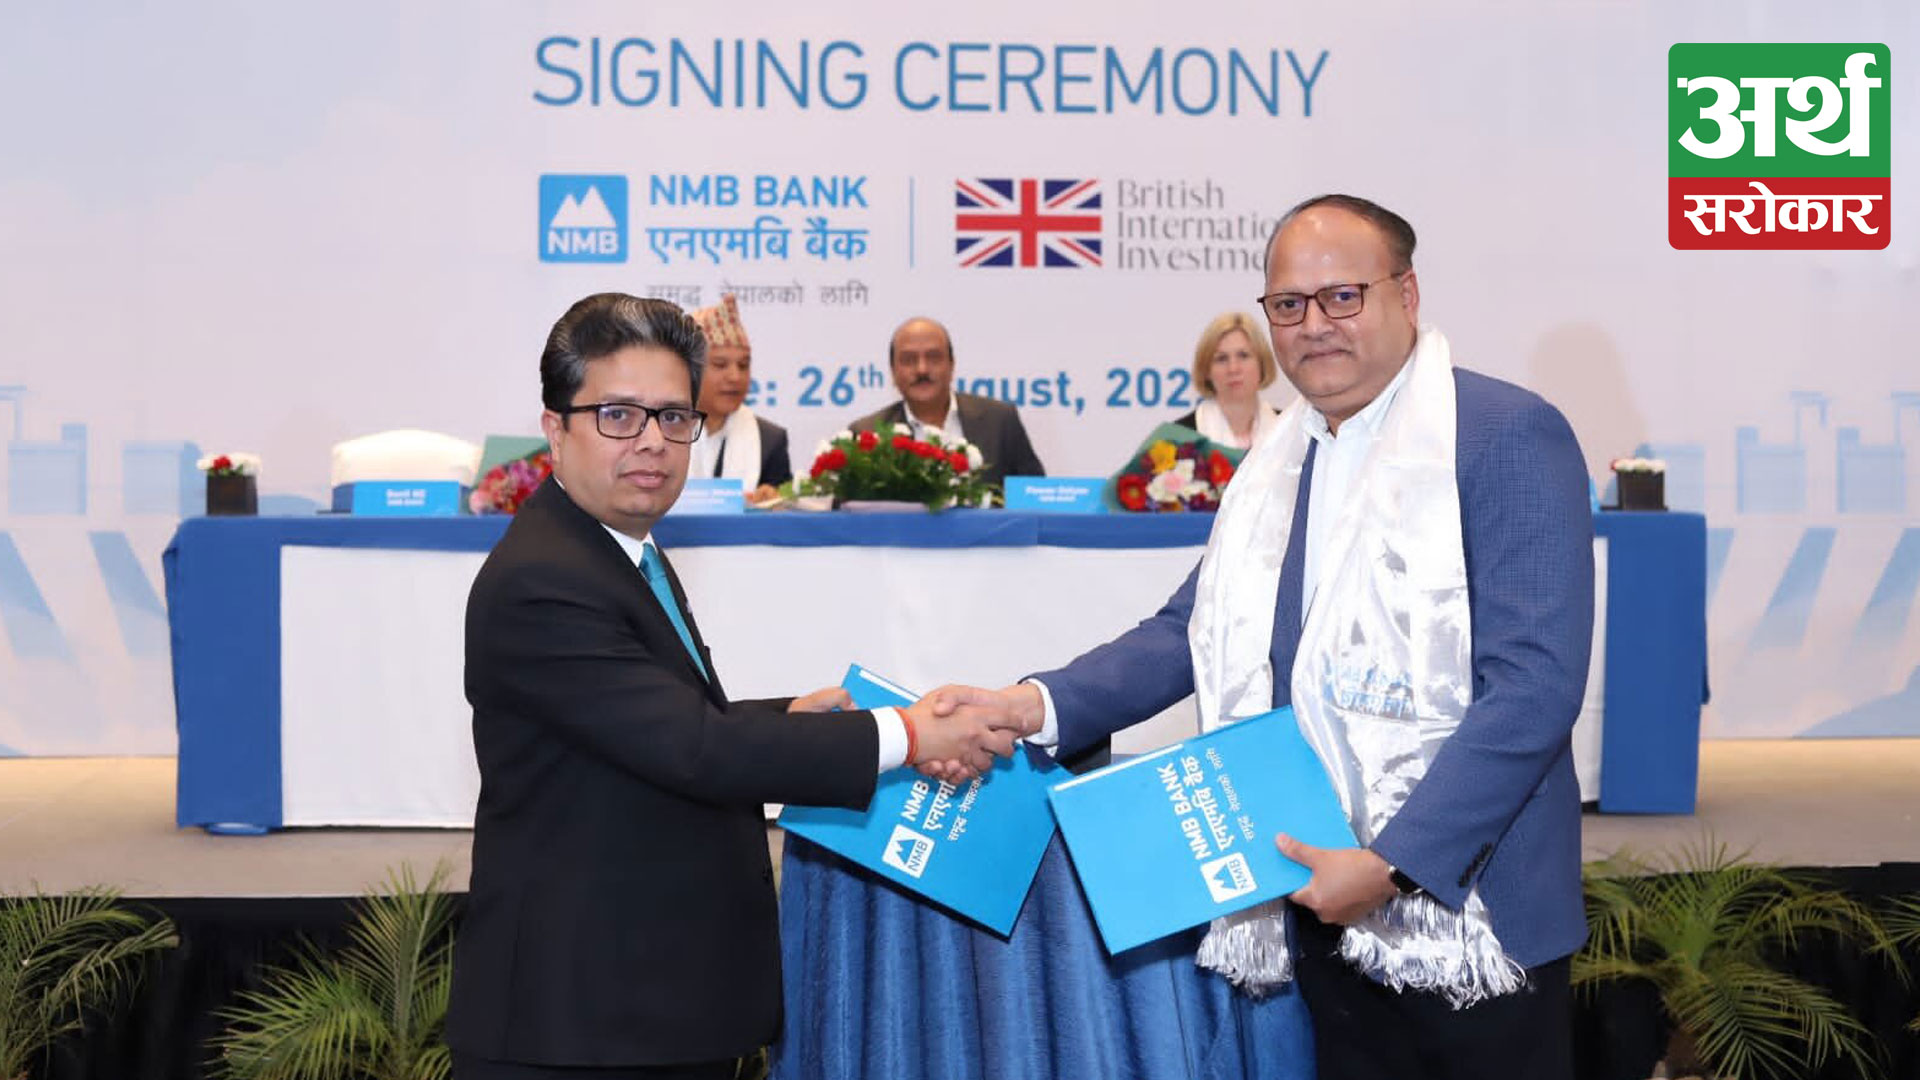 NMB Bank secures $25 Million clean energy funding from British International Investment